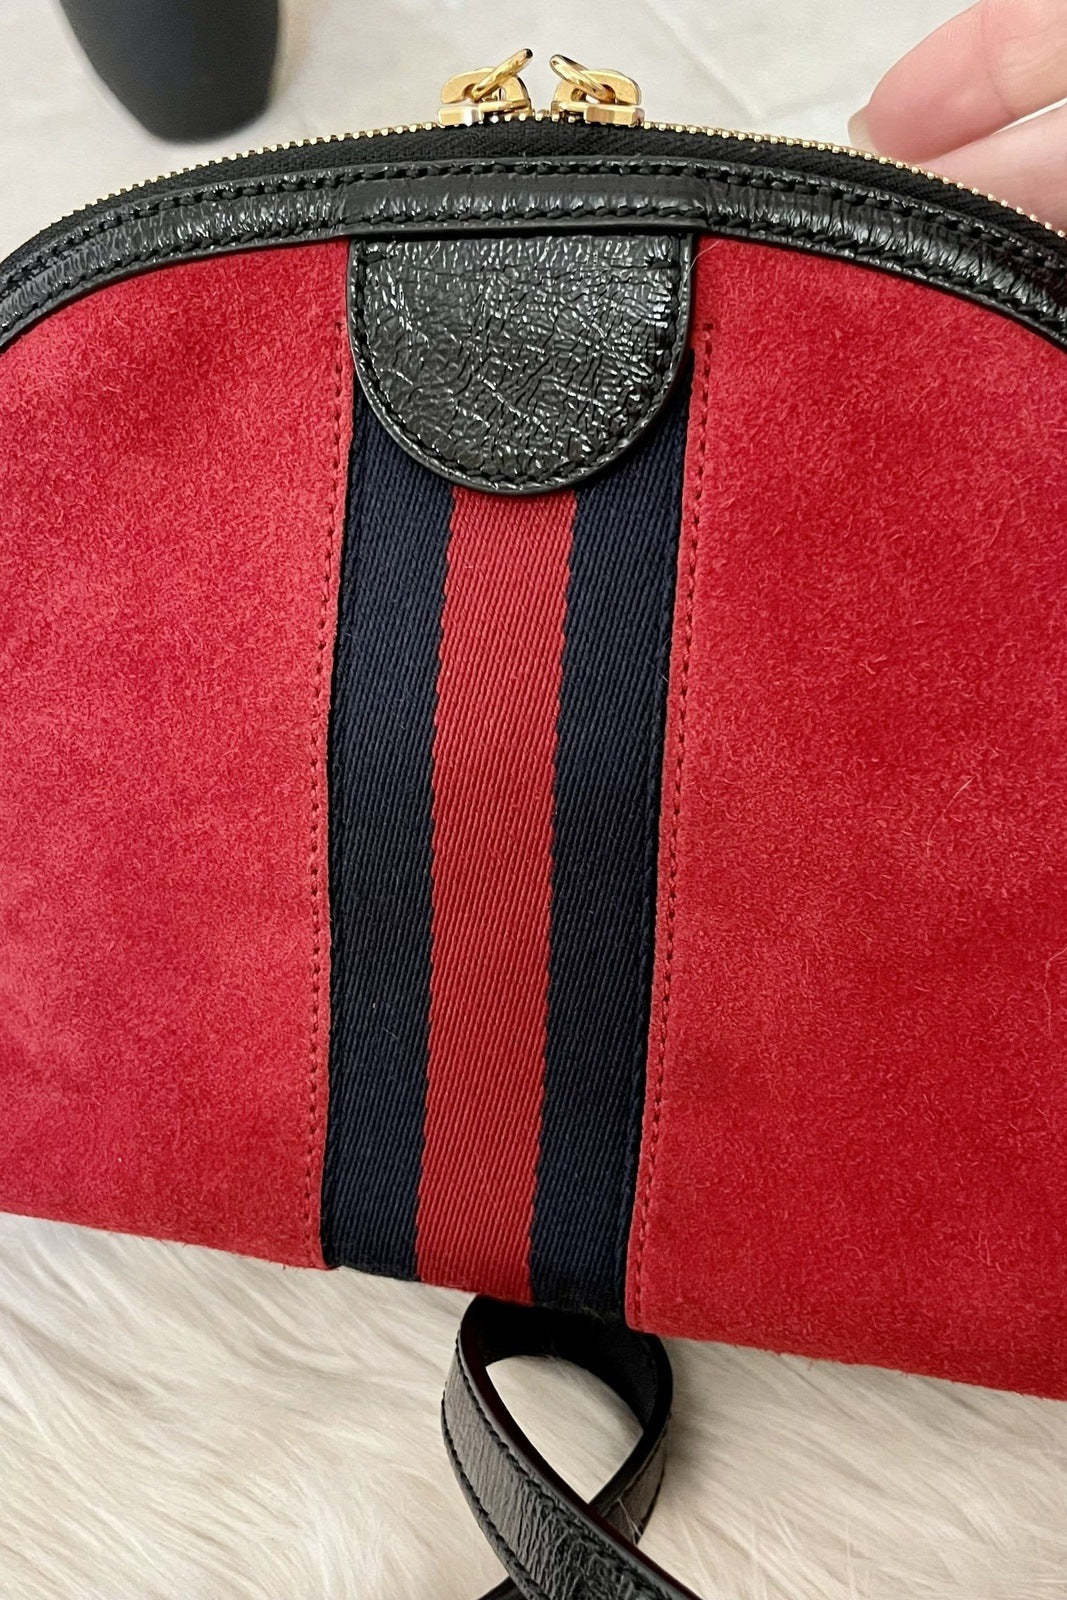 Gucci Ophidia Shoulder Bag Small red suede and black leather